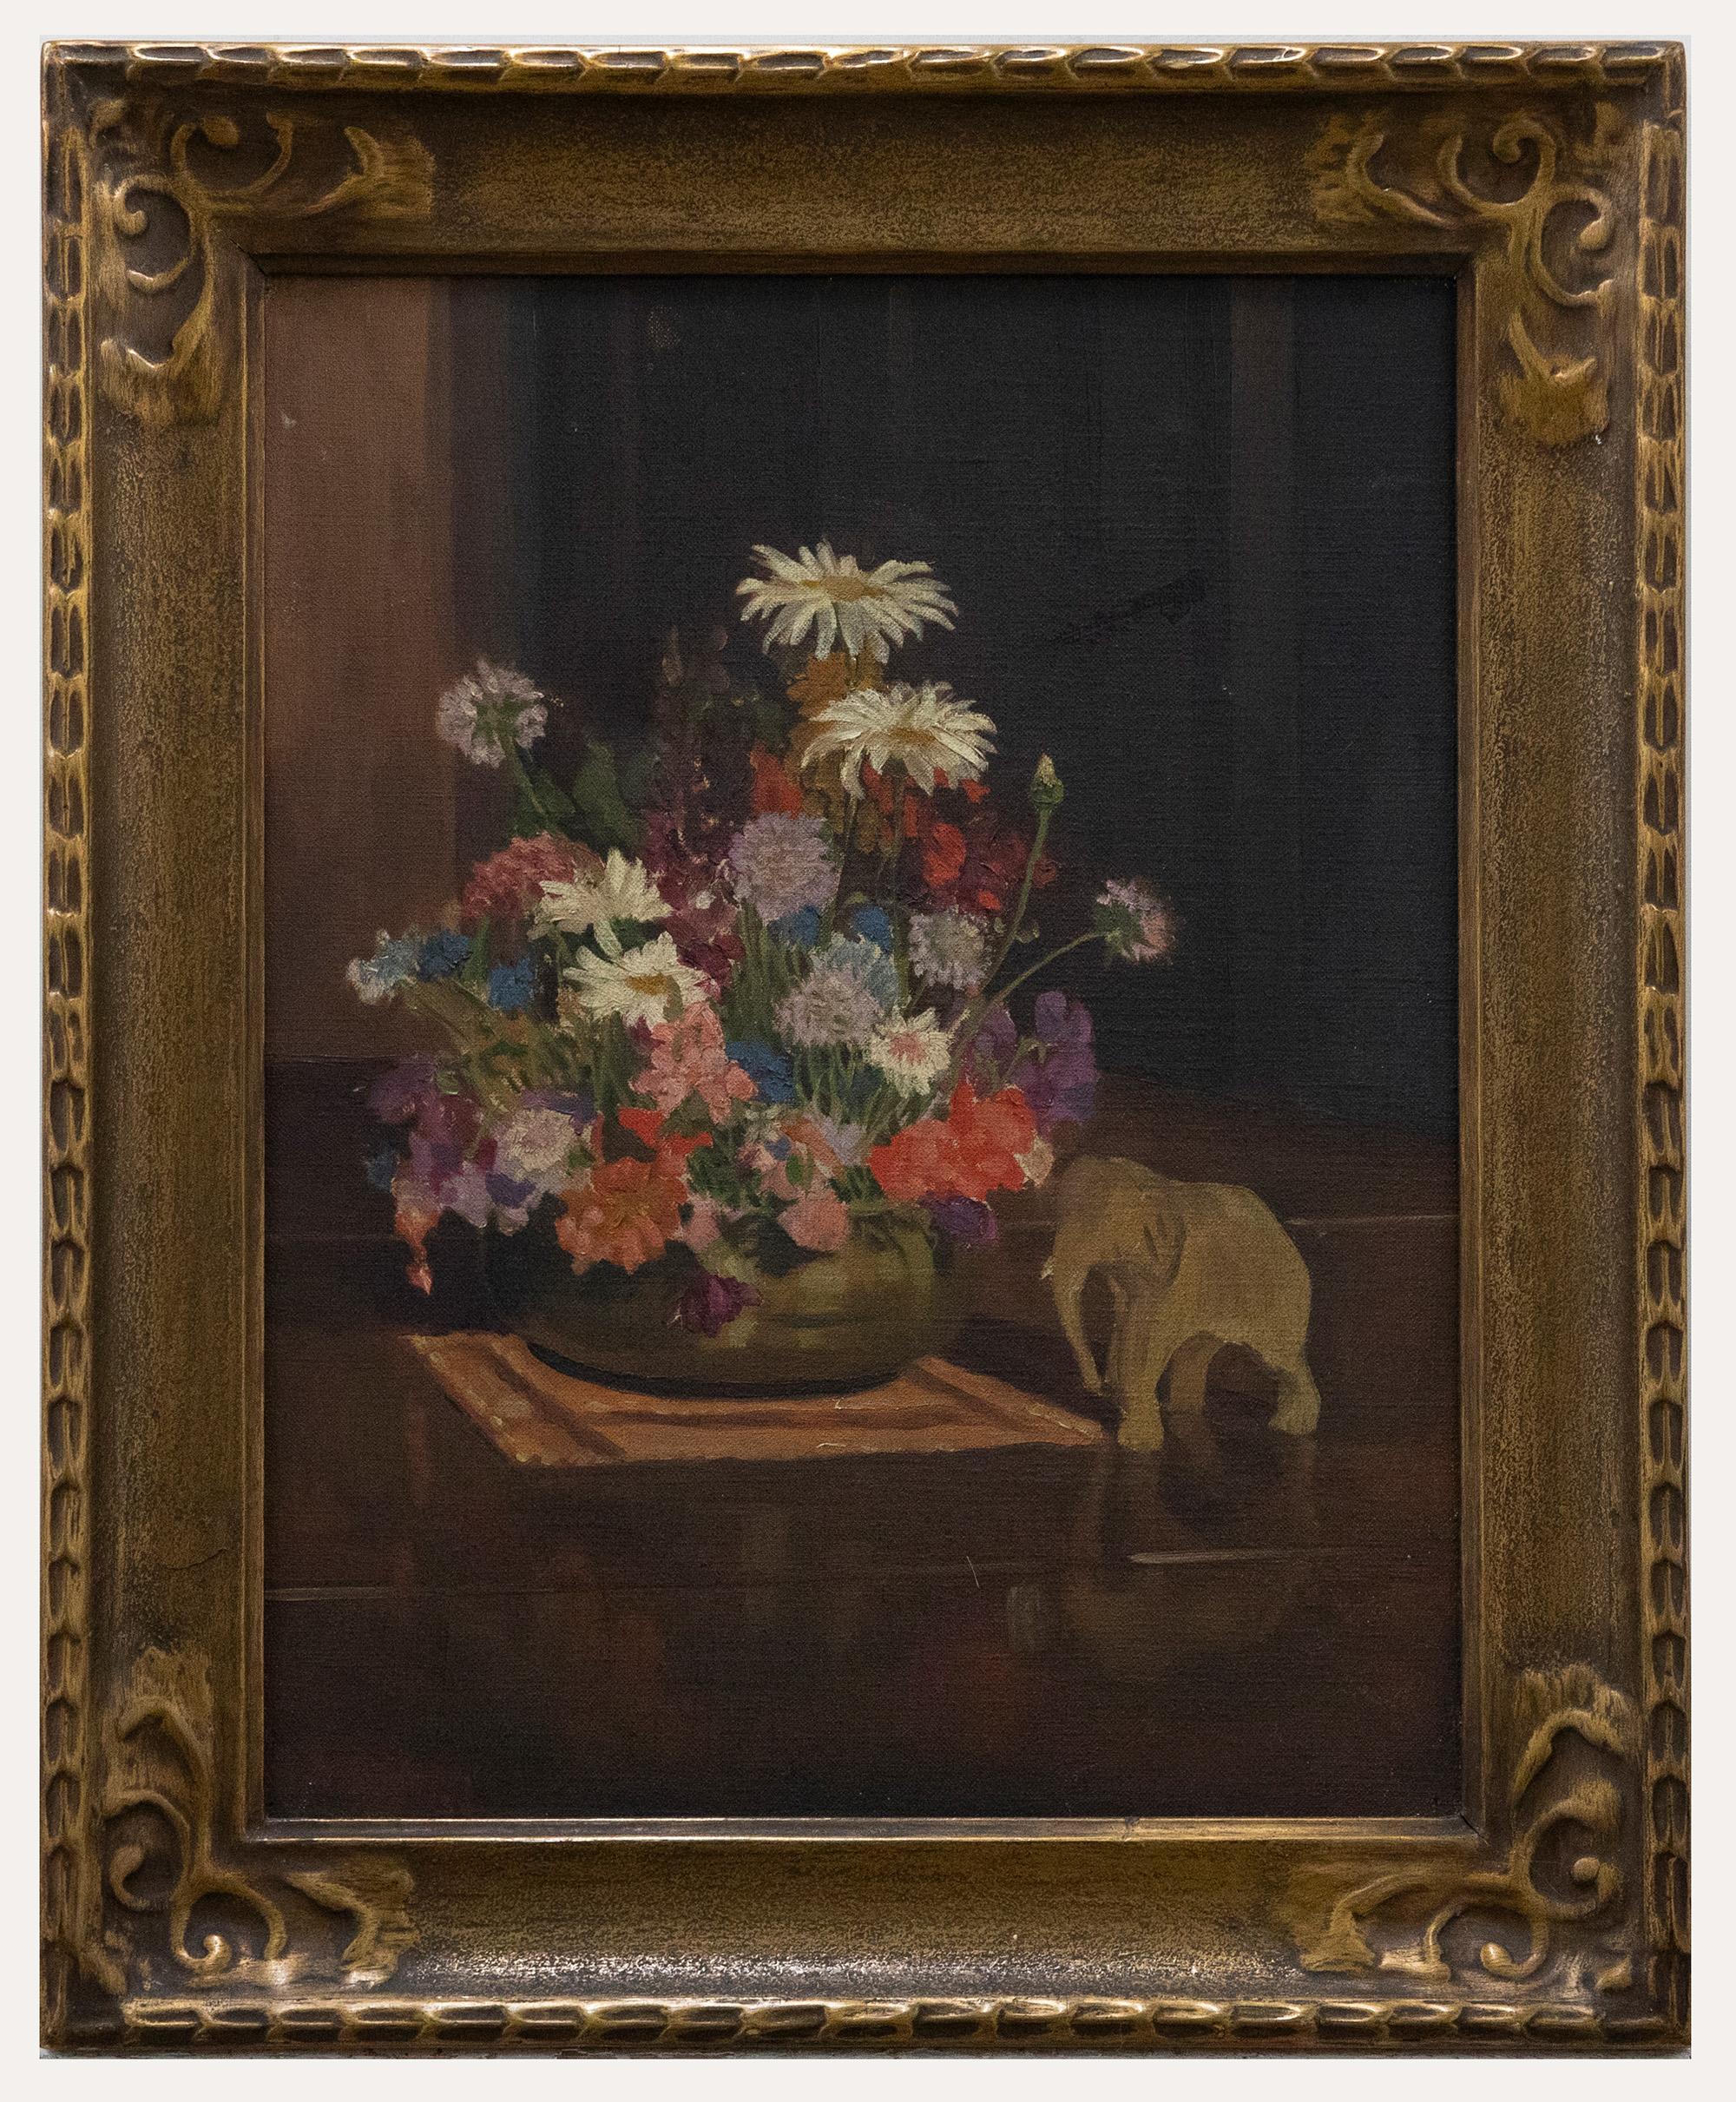 Unknown Still-Life Painting - N.F. Shelton - 1930 Oil, Wildflowers with Elephant Ornament